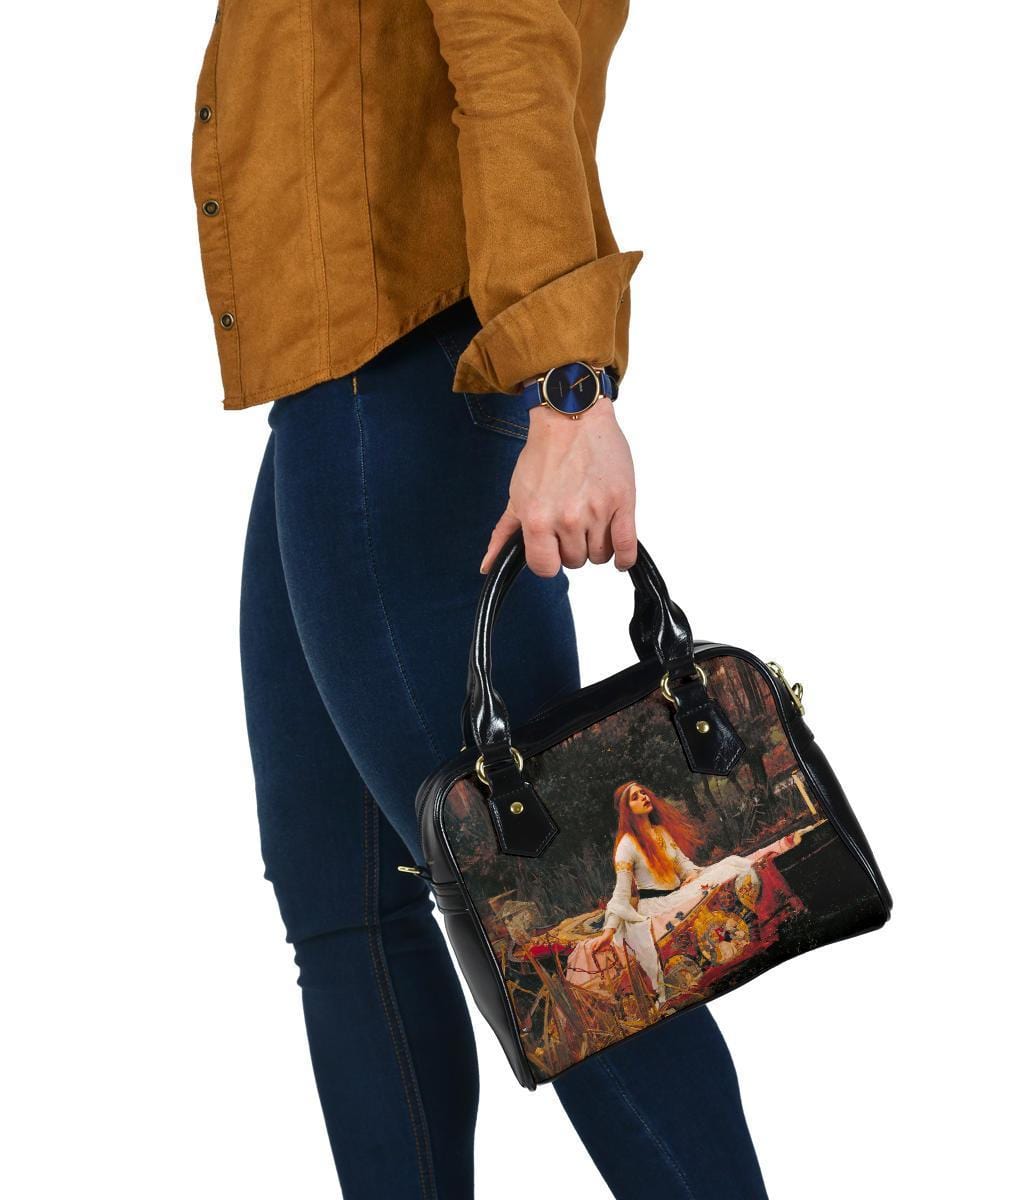 woman wearing blue jeans carrying the Lady of Shalott handbag